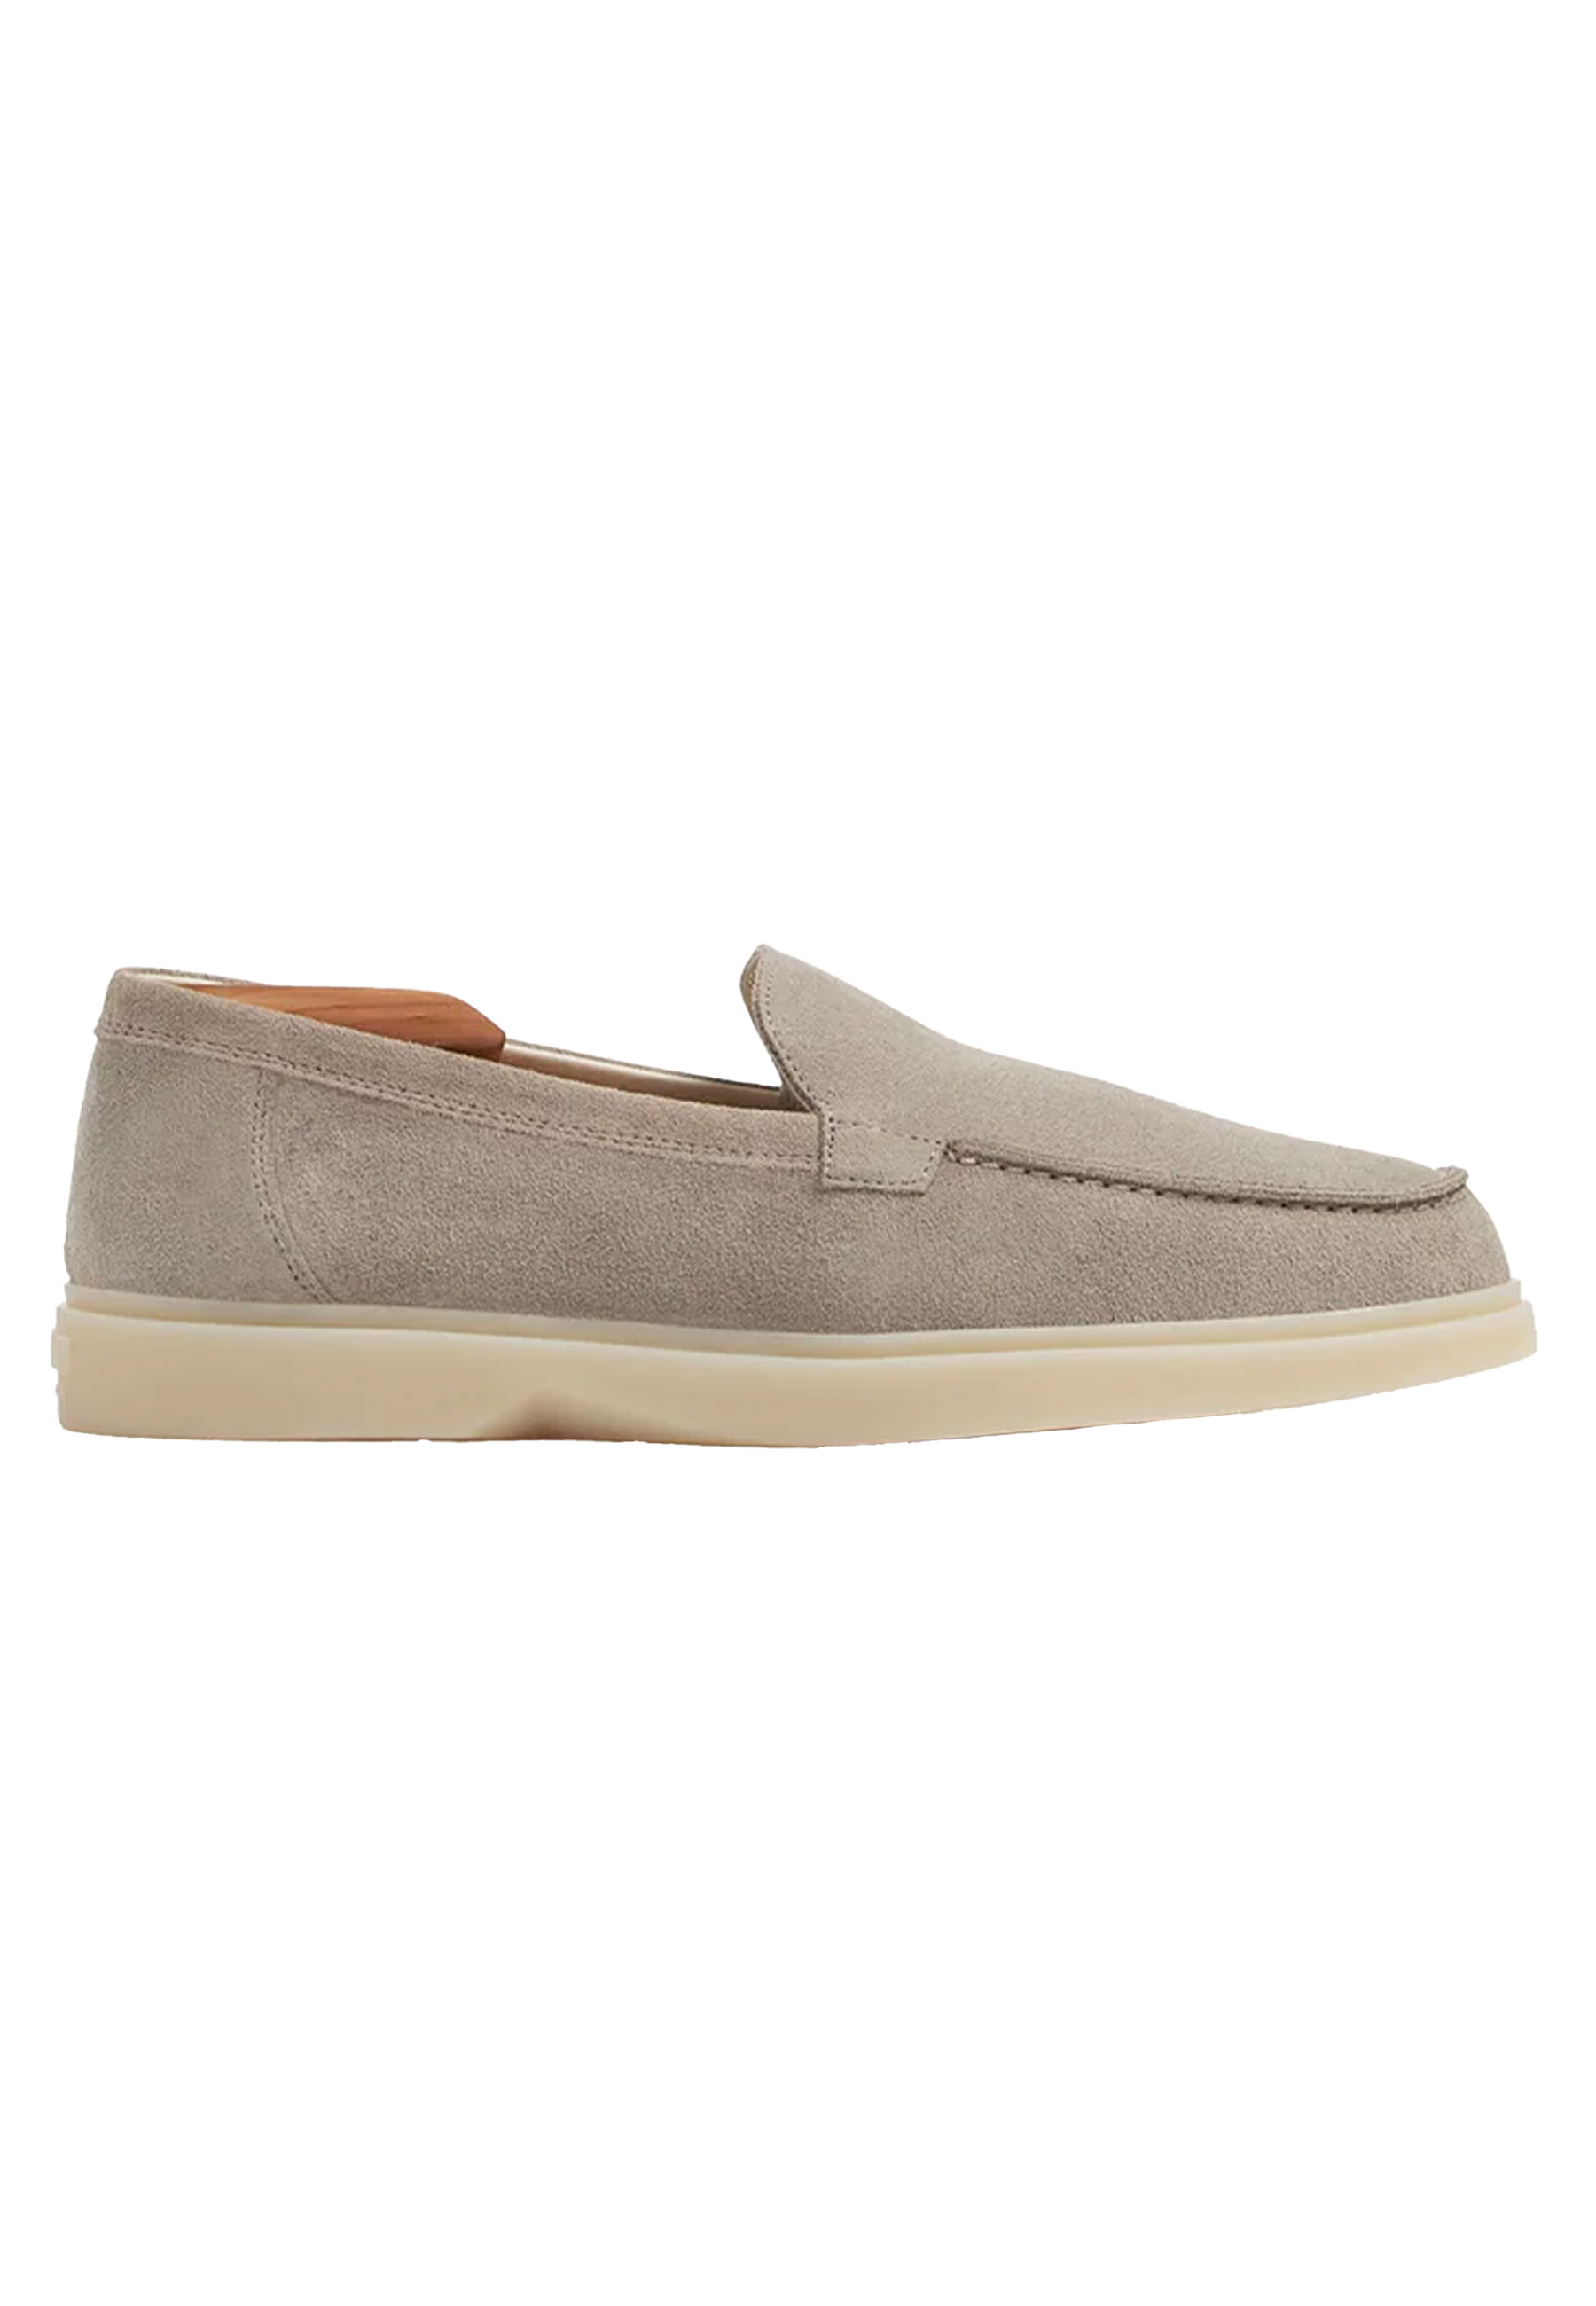 Schoenen Taupe Amalfi loafers taupe